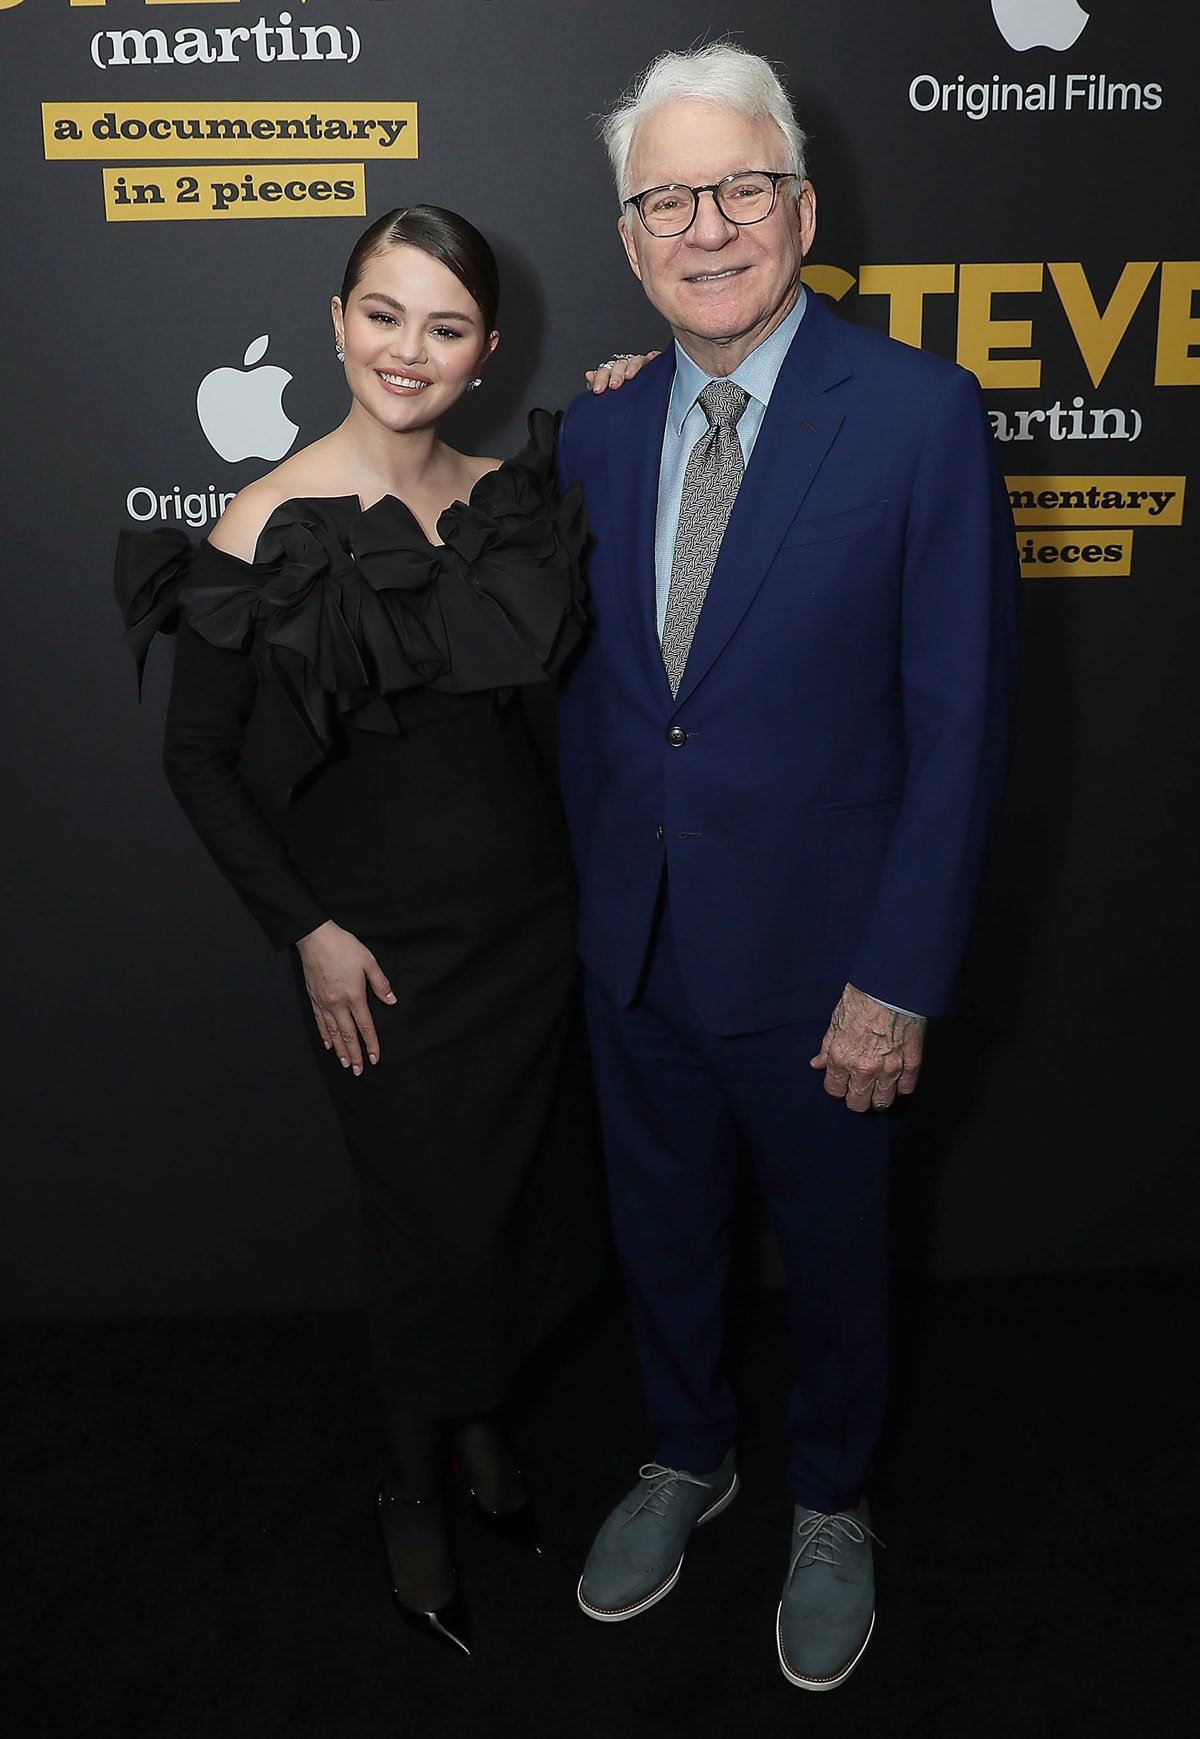 Selena Gomez expertly enhances her petite frame with towering Christian Louboutin pumps, standing confidently next to the taller Steve Martin at the 'STEVE! (Martin): A Documentary in 2 Pieces' premiere